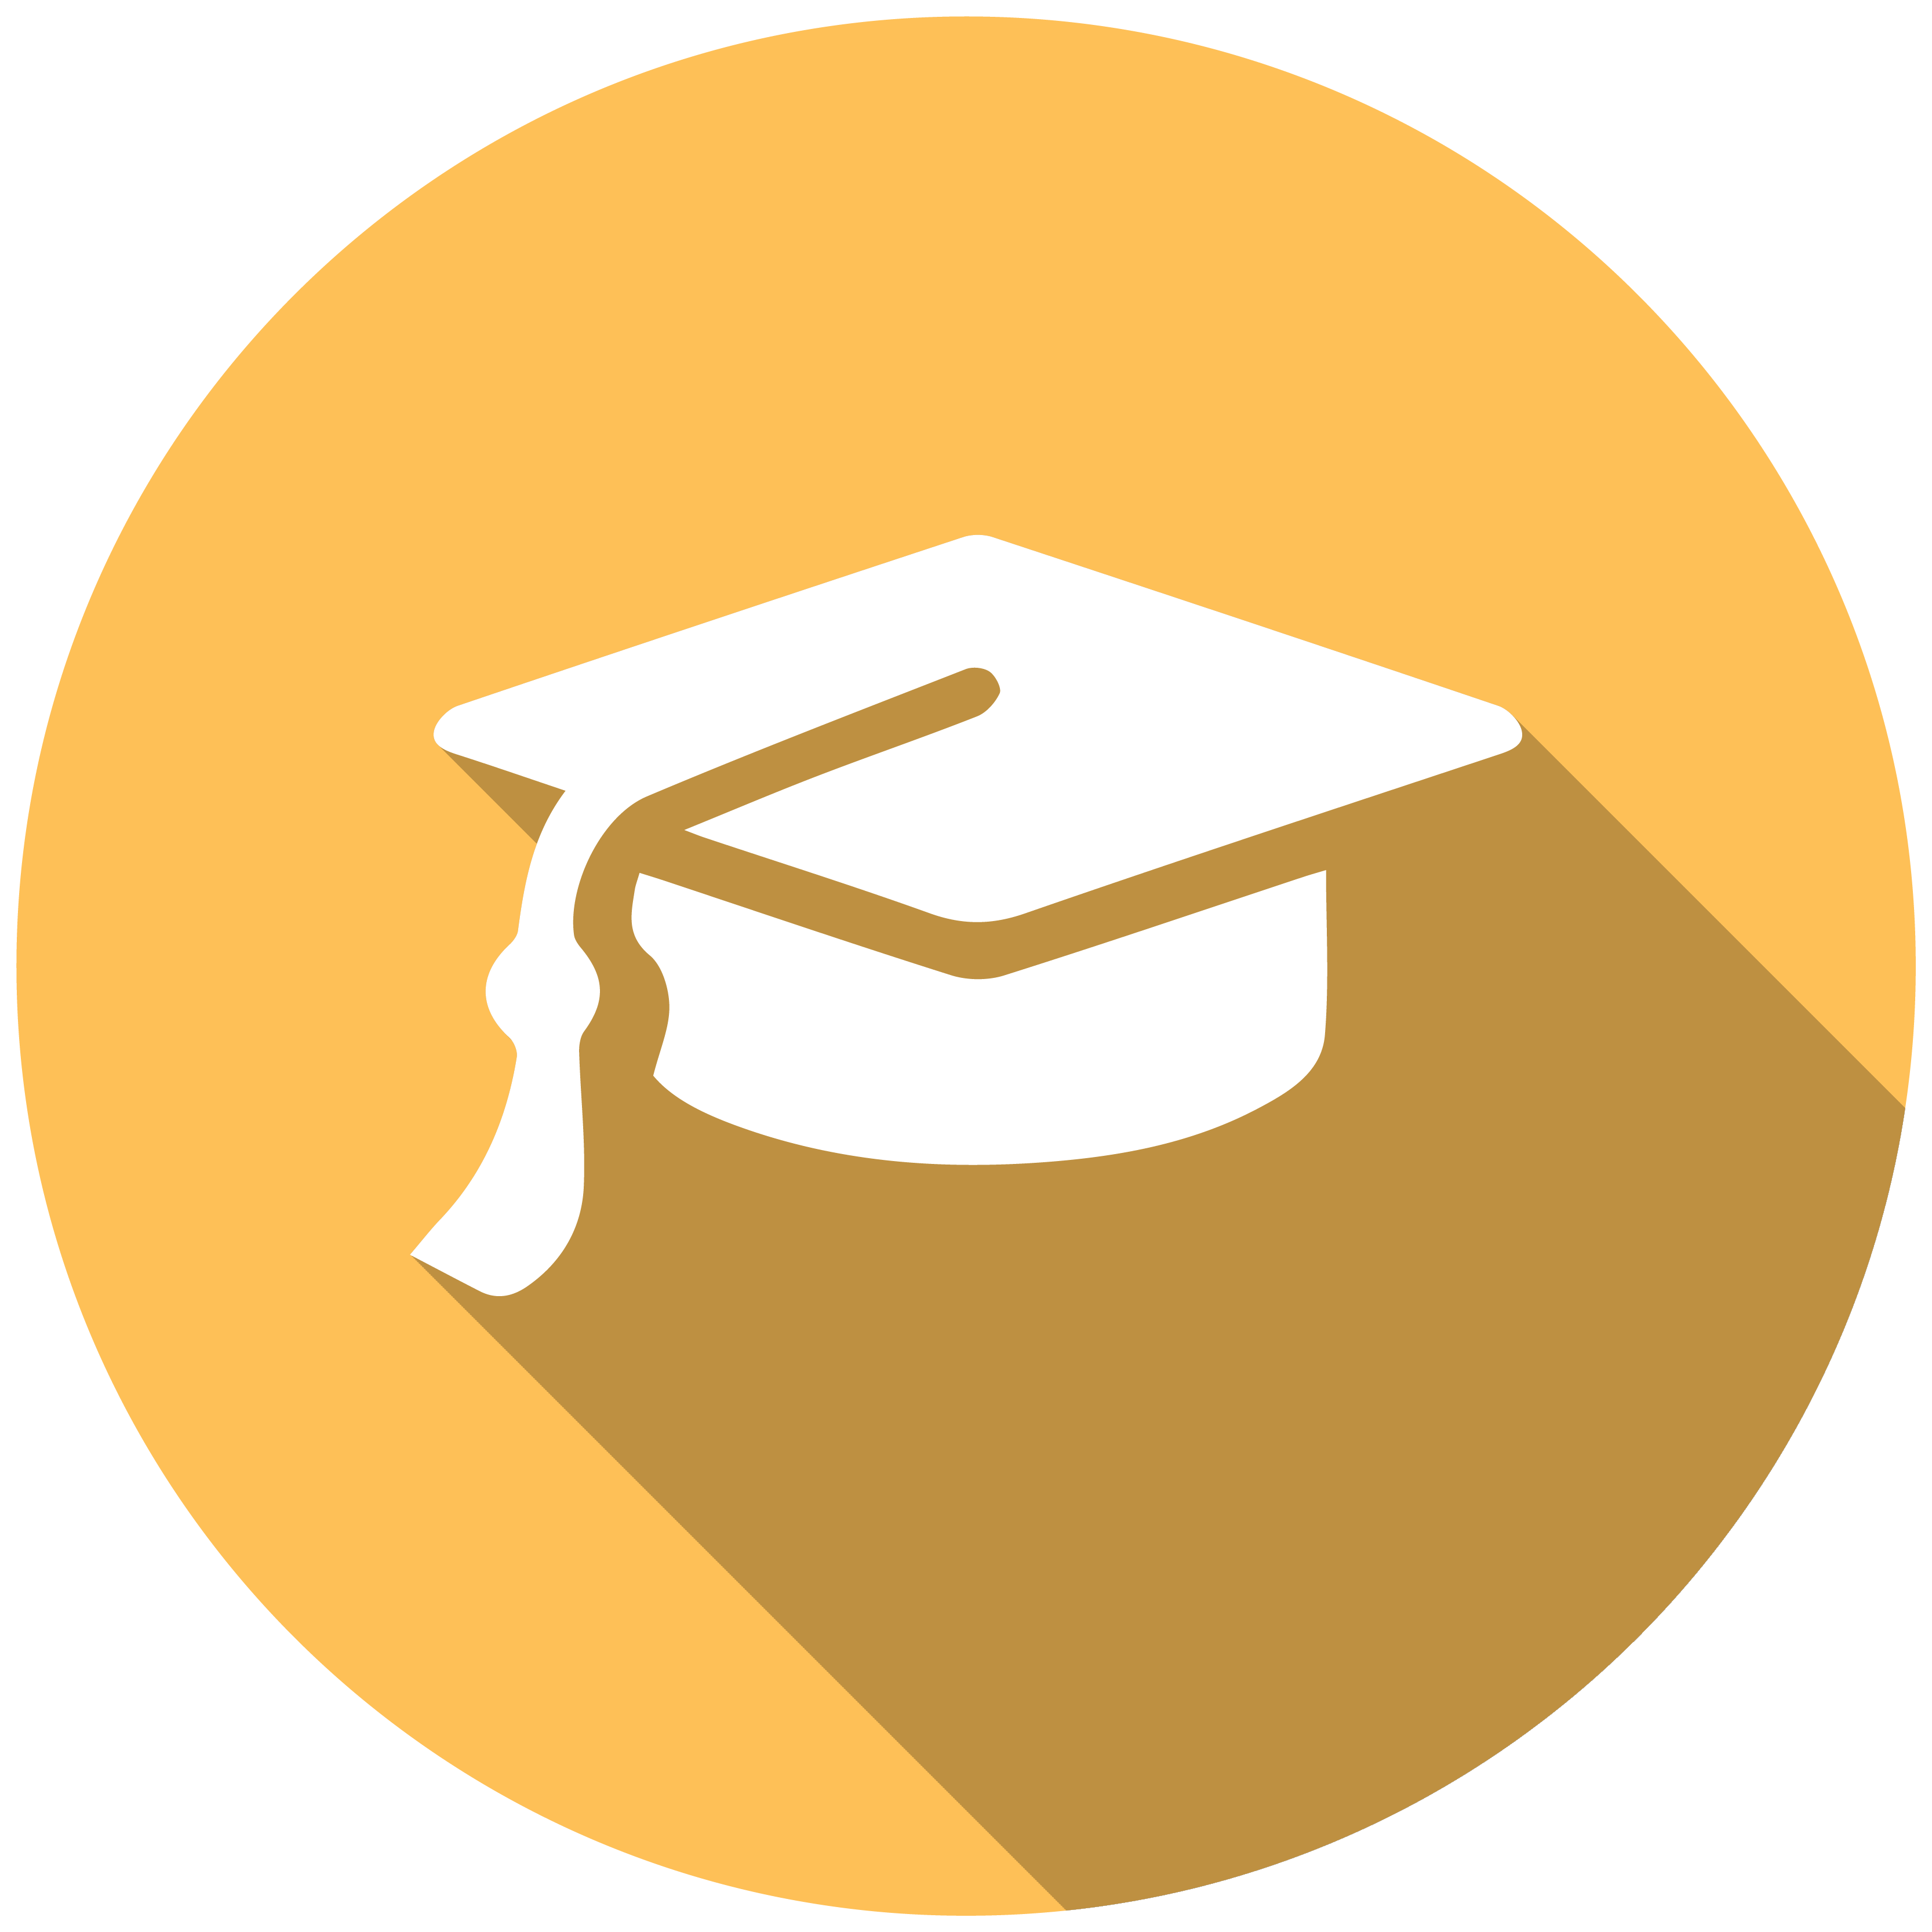 Icon graduation hat clipart vector - Search Illustration, Drawings 